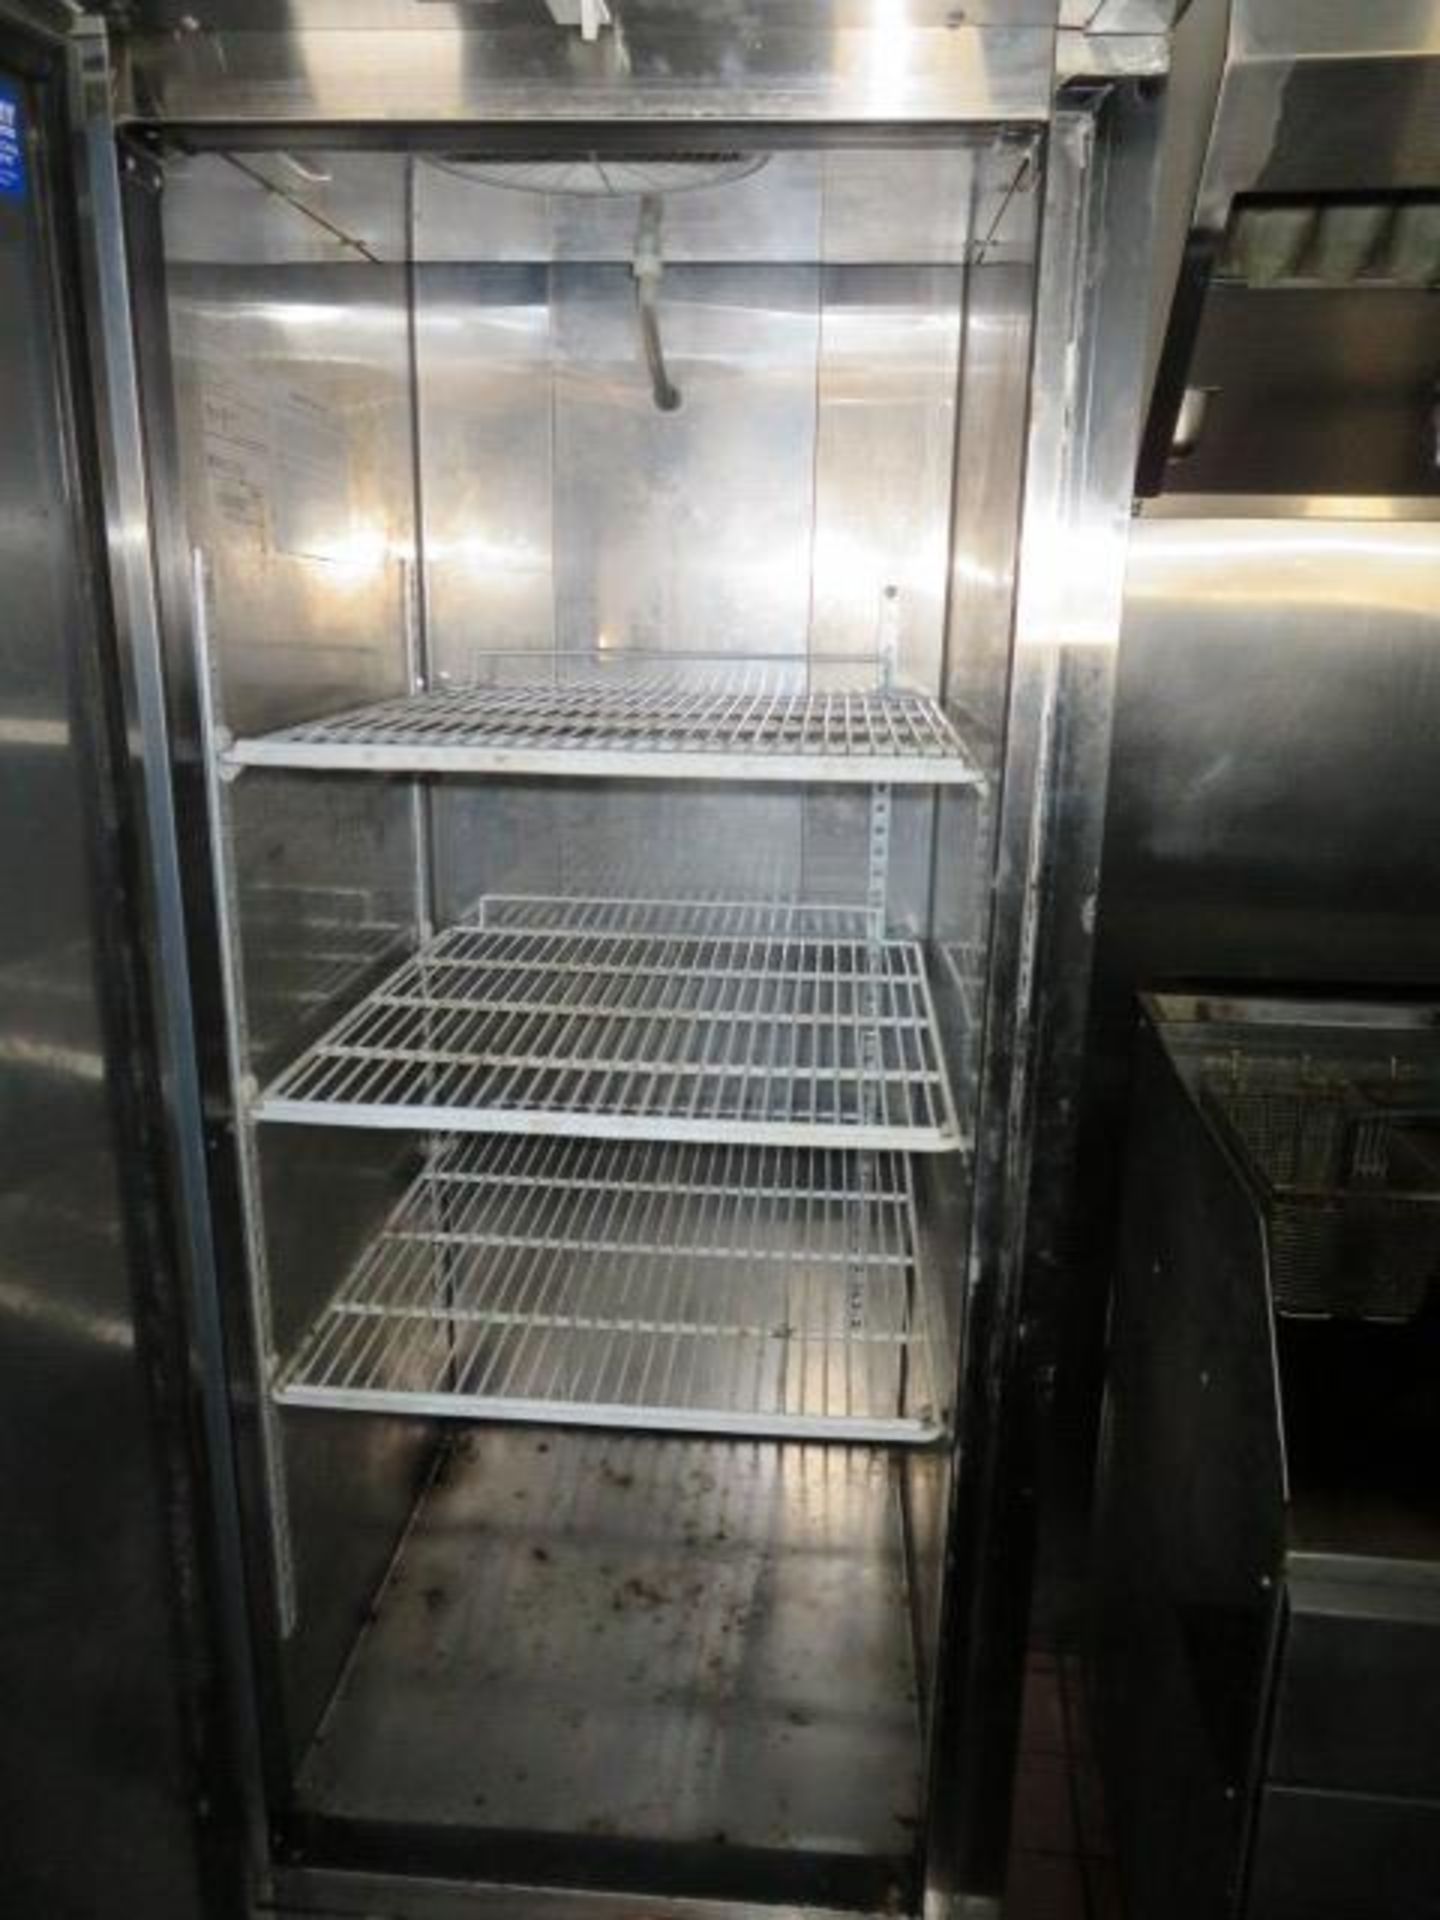 COLD MAXX FREEZER, MDL. MCF-23FD, DRO, CASTERS (Located - Mays Landing, NJ) - Image 4 of 7